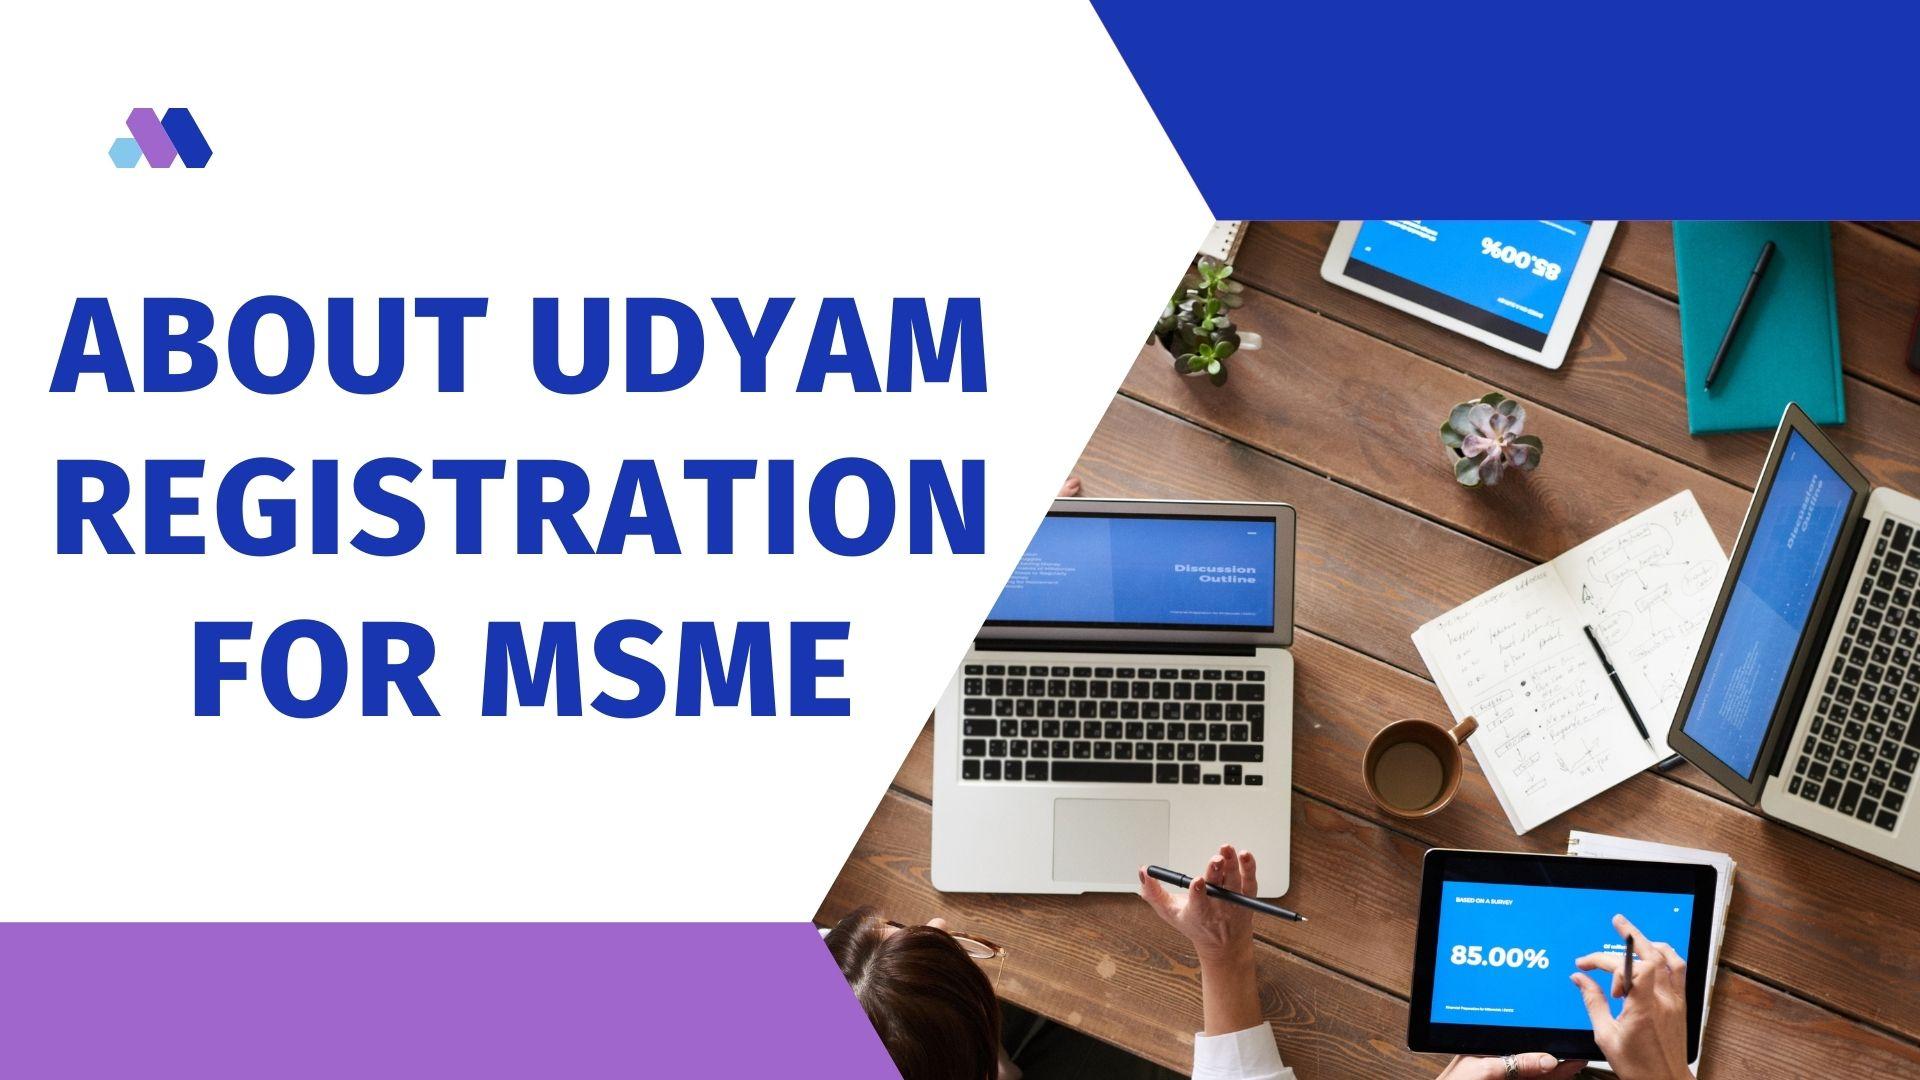 ABOUT UDYAM REGISTRATION FOR MSME